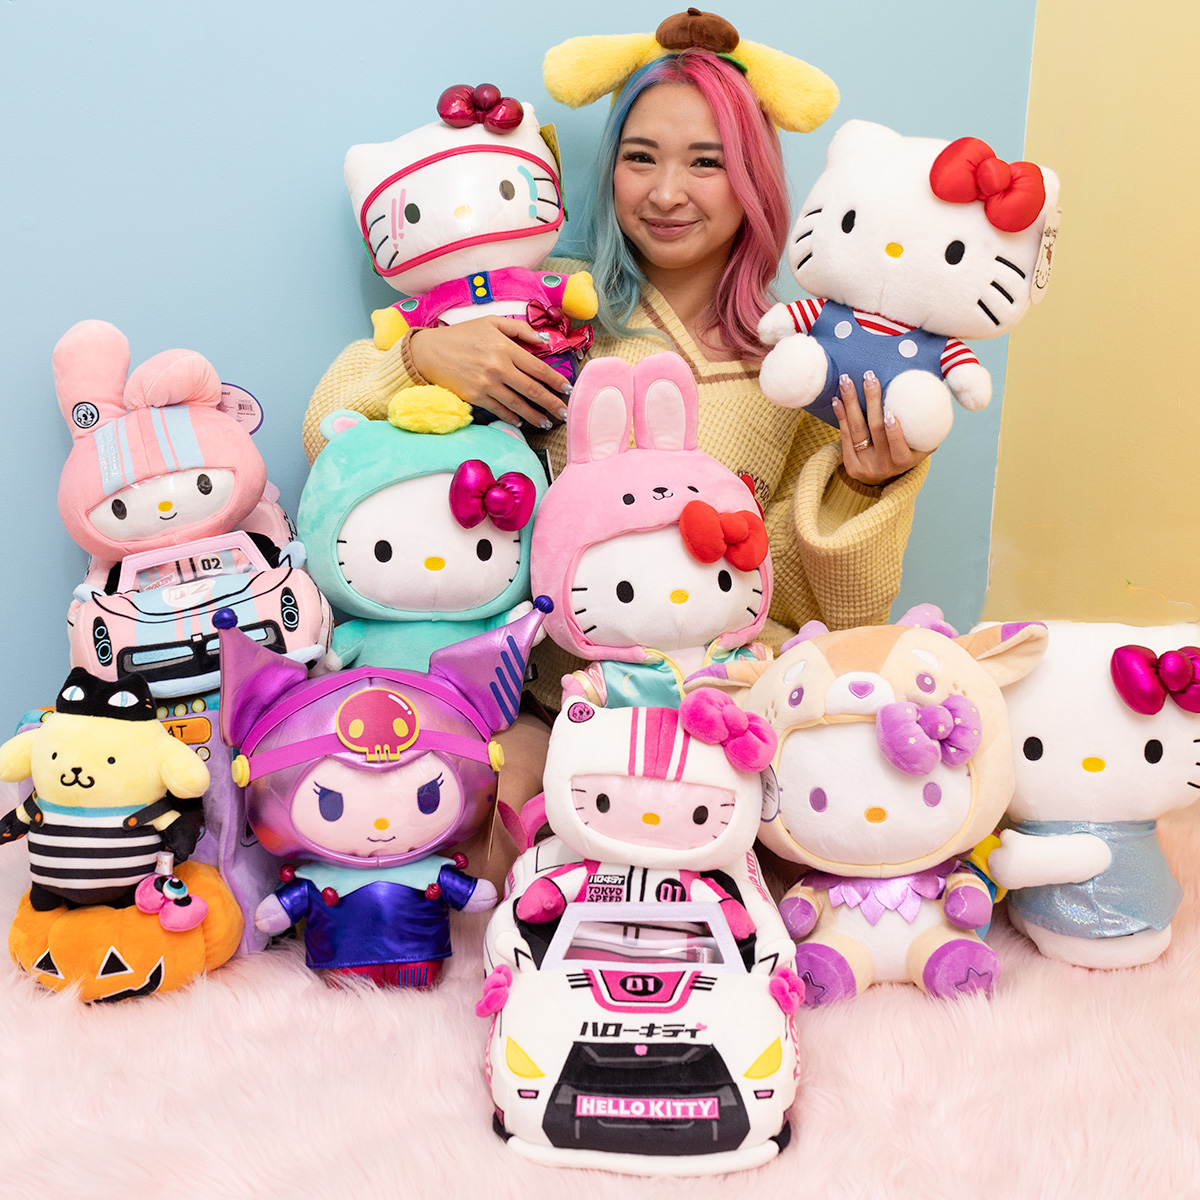 This is the last chance to get your hands on some of the iconic kidrobot x Sanrio plushies, figures, and more! ✨ These collectible goods will not me remade again by kidrobot. Don't miss out on the kidrobot items you've been eyeing! Available now on japanla.com!